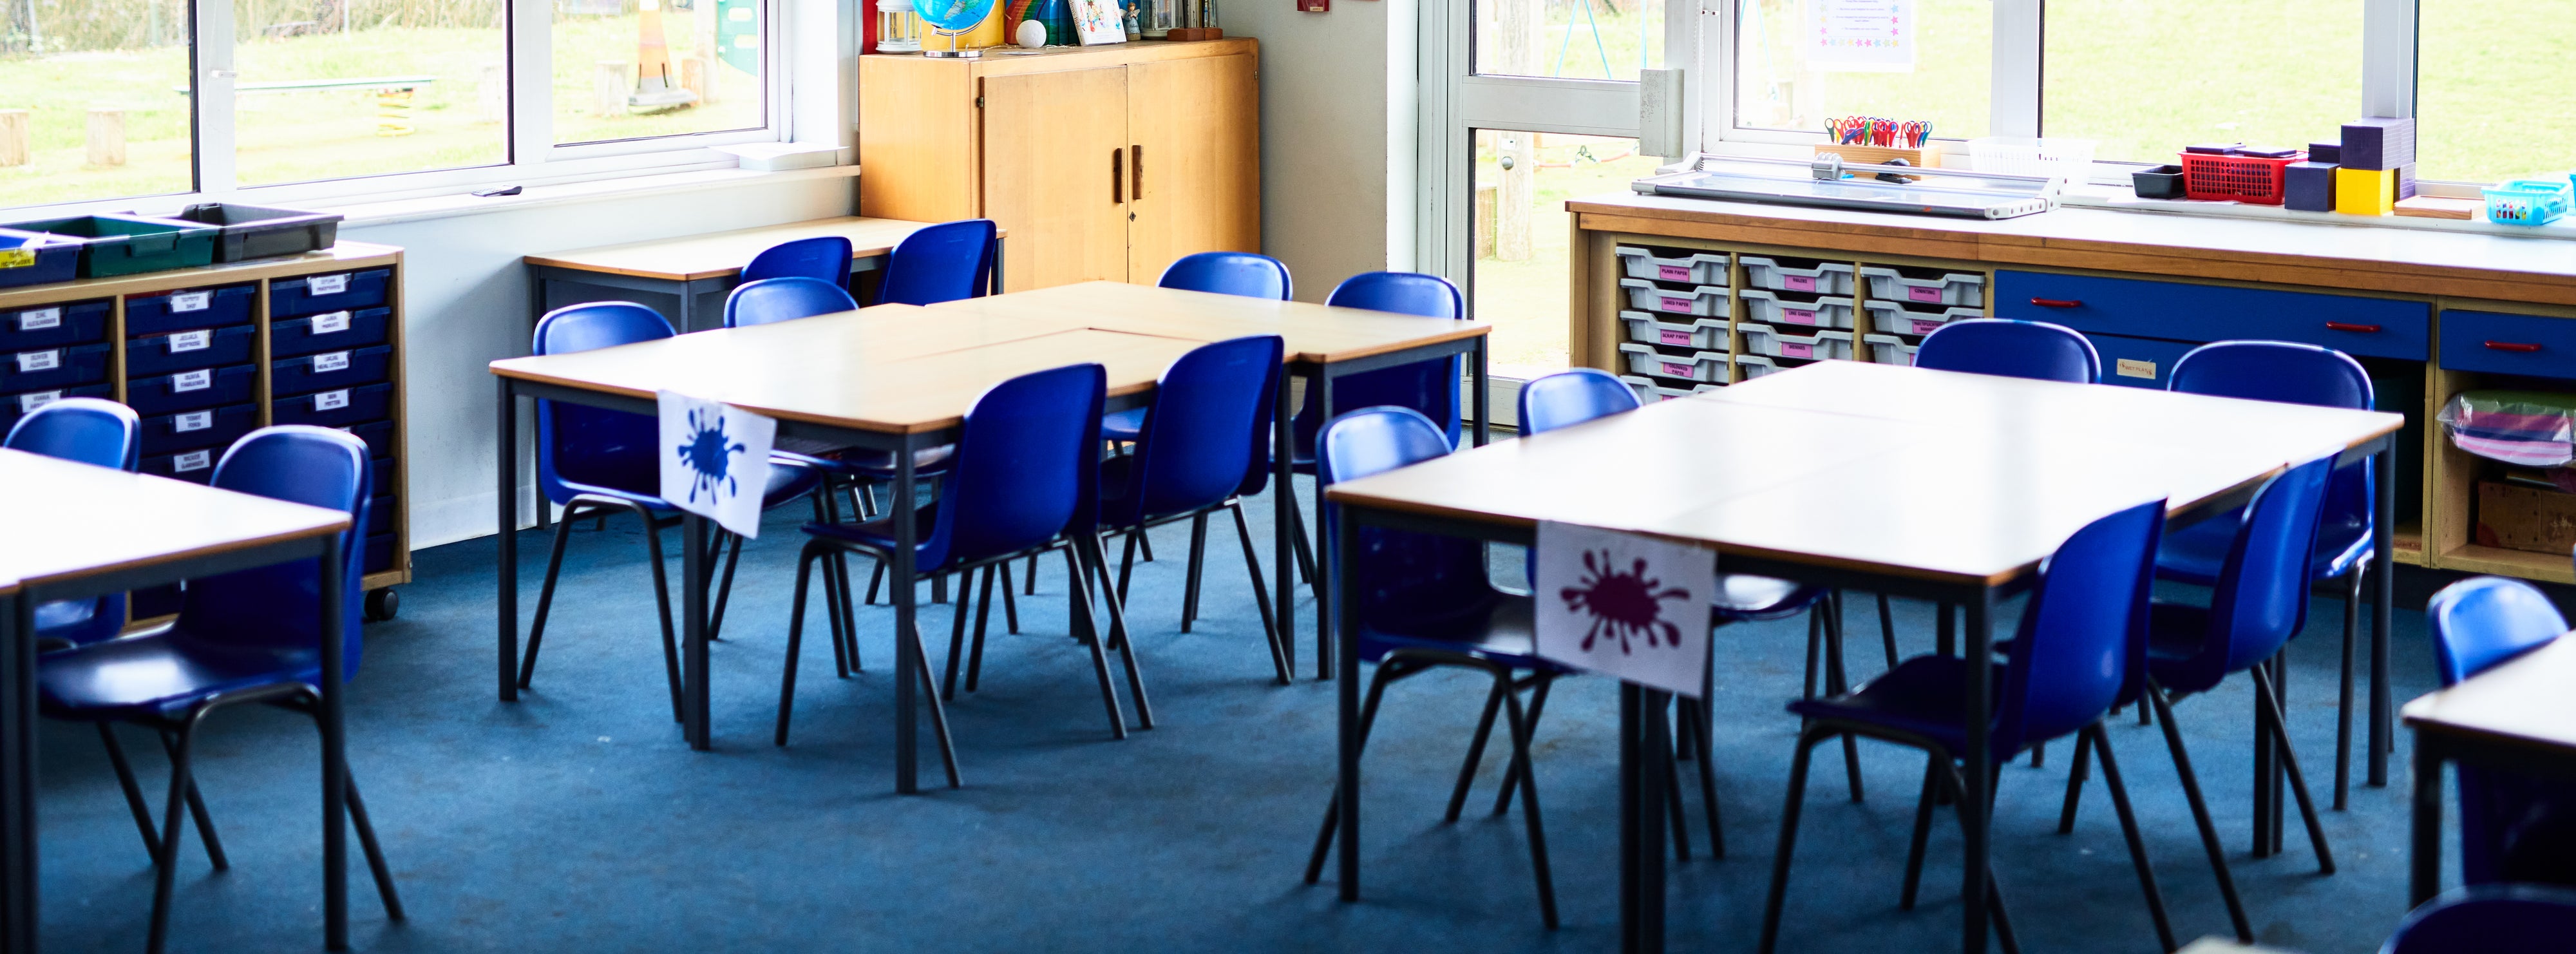 Tidy tables and chairs arranged in school class room